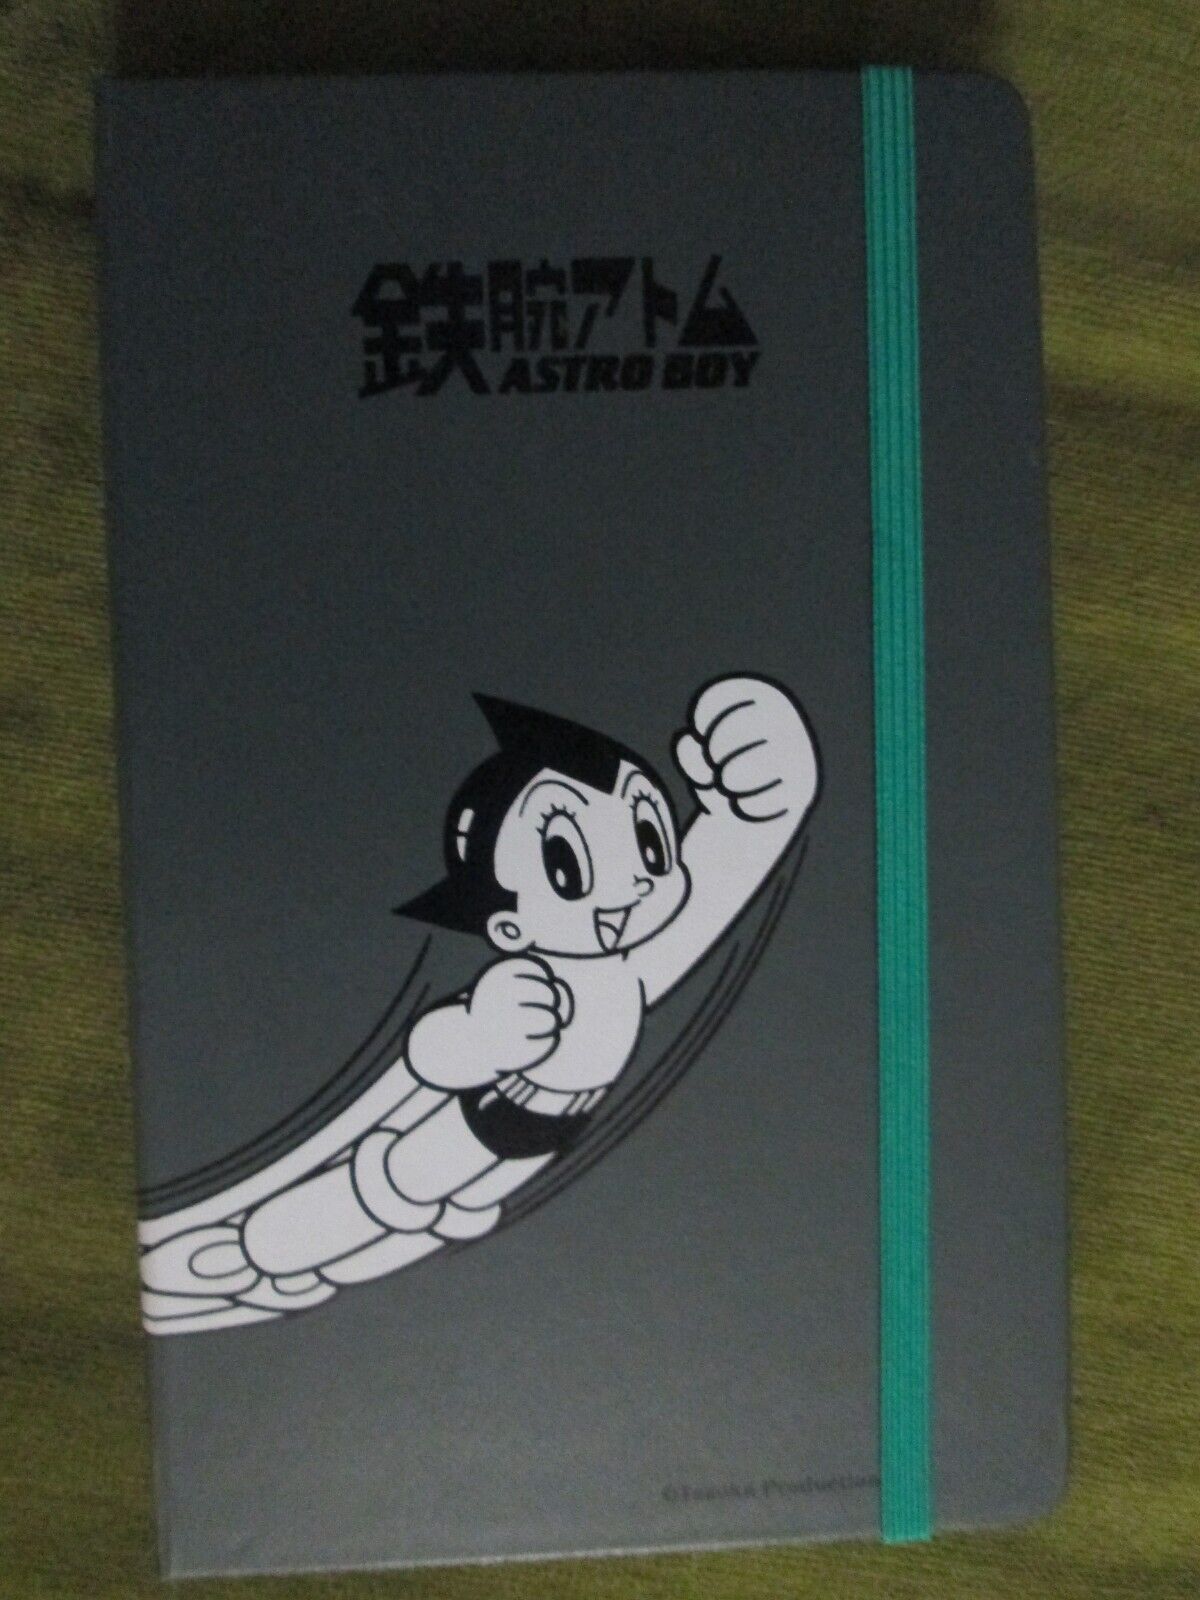 astro boy ruled notebook limited edition.